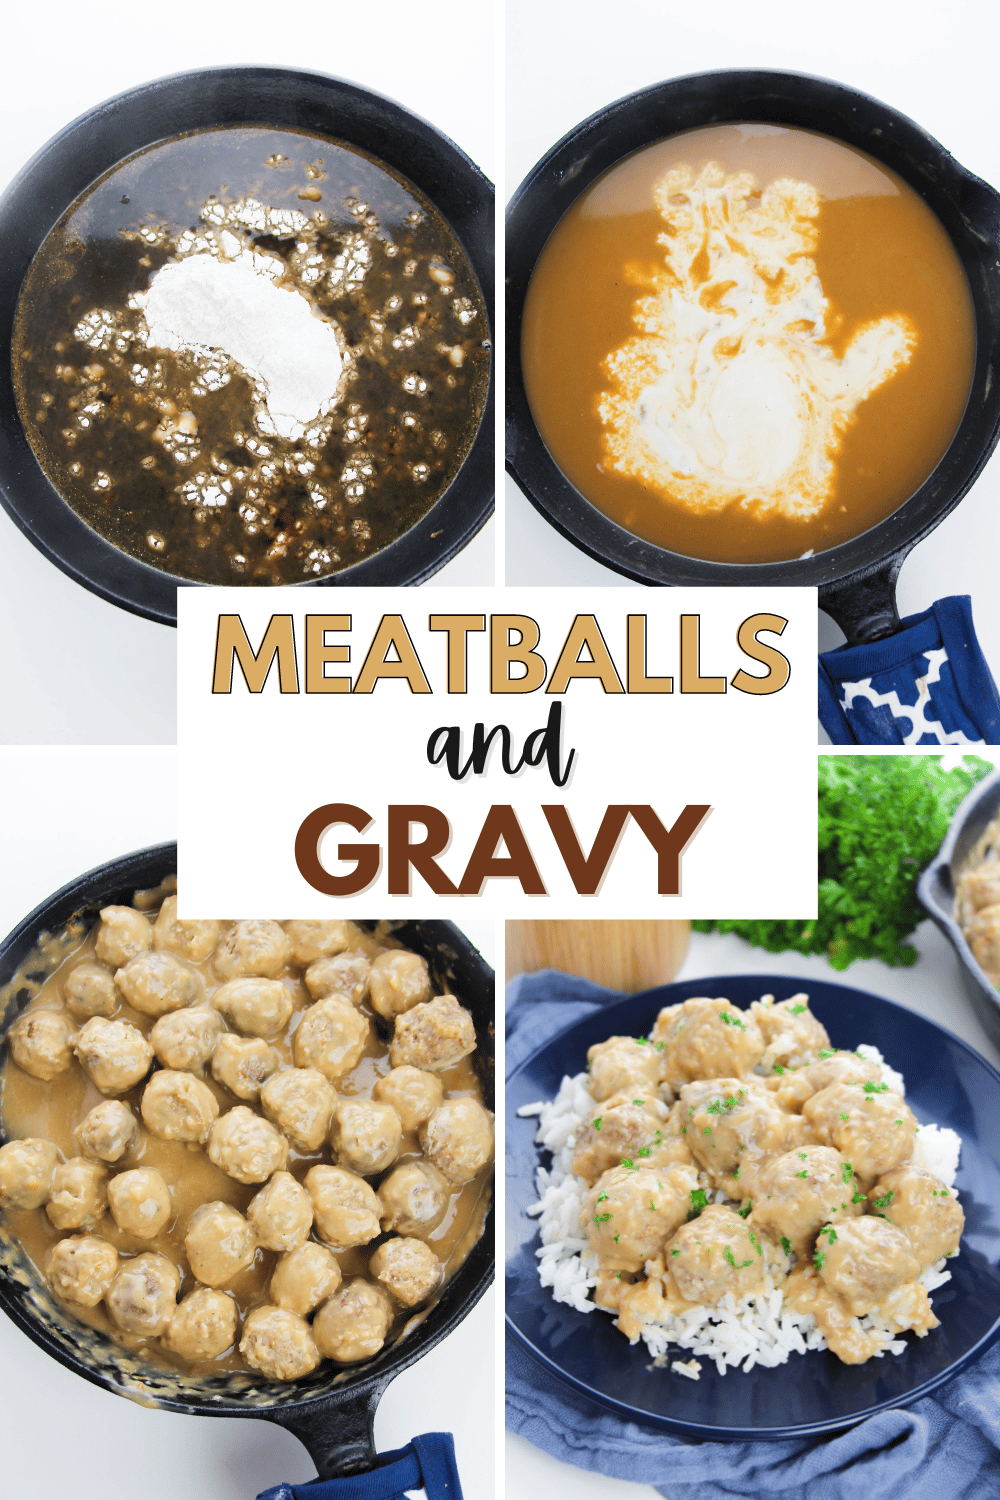 This Meatballs and Gravy recipe is a classic comfort food that makes the perfect weeknight meal. You'll fall in love after the first bite. #meatballsandgravy #comfortfood #meatballs via @wondermomwannab